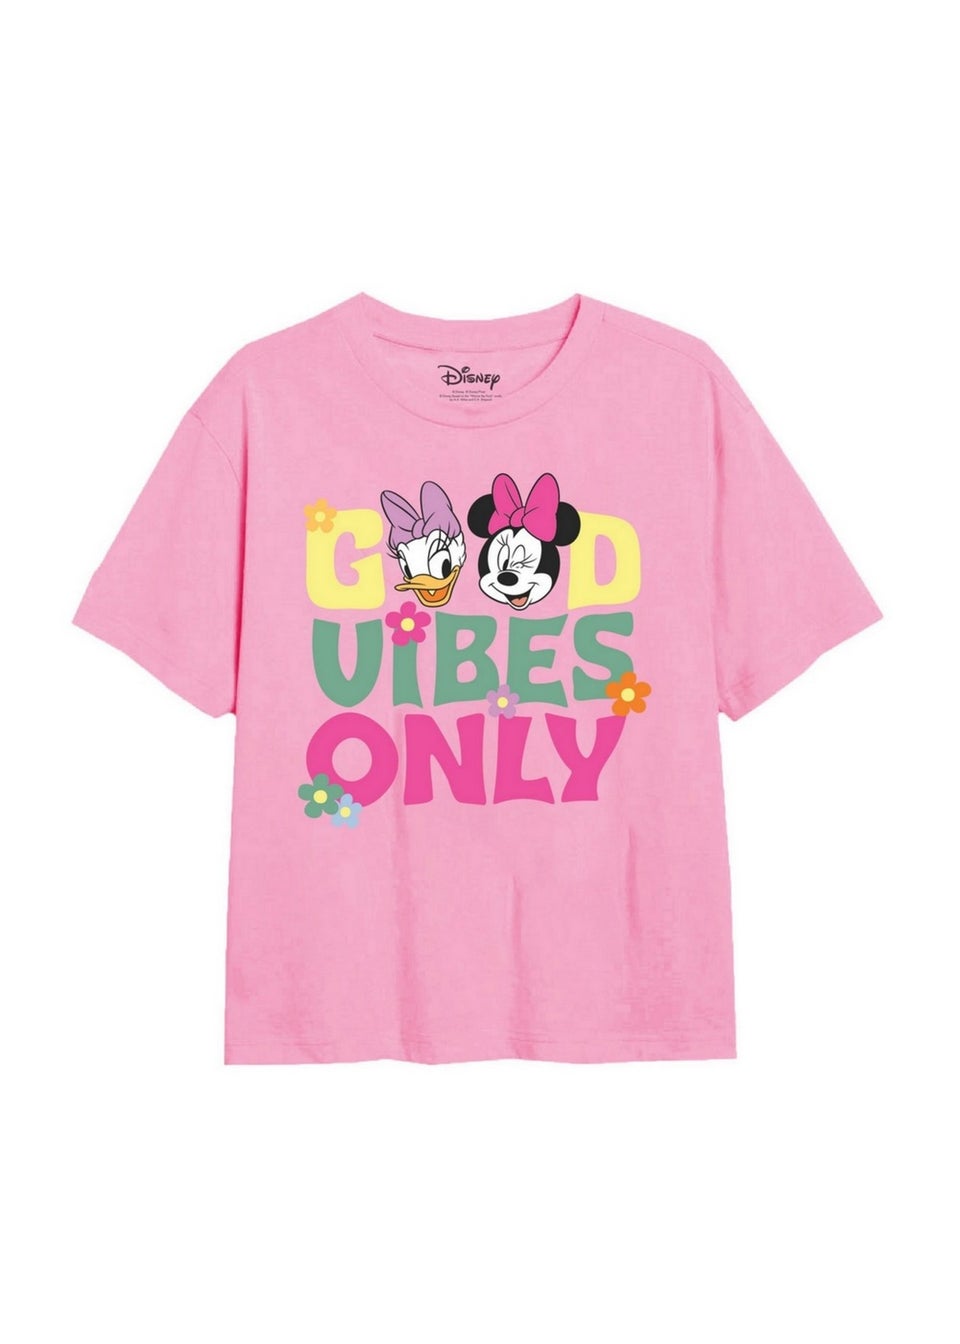 Disney Girls Pink Good Vibes Only Minnie Mouse T-Shirt (3-8yrs)